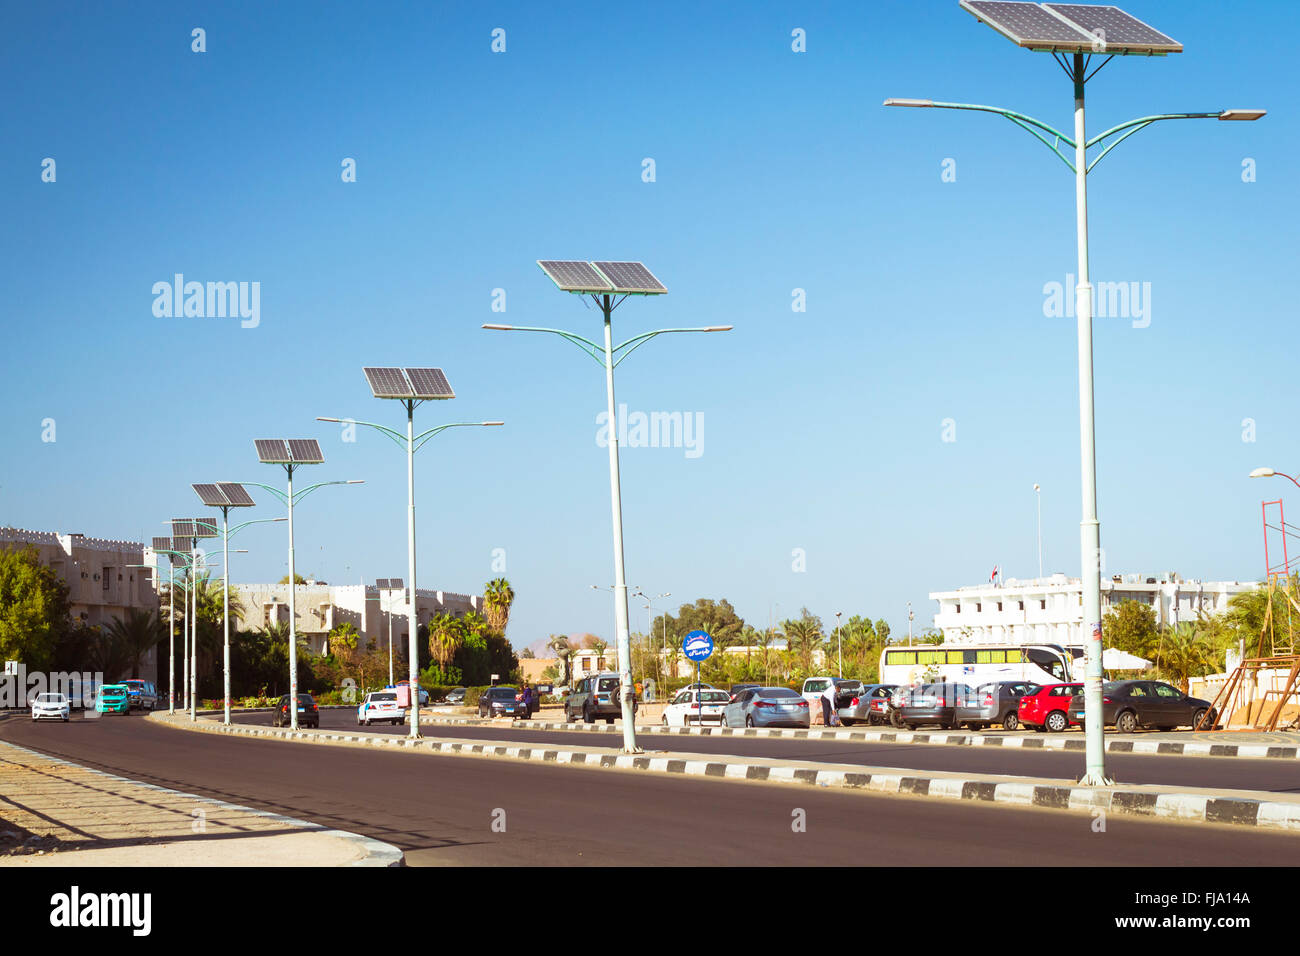 Solar panels on electric pole for lighting on the road in the city, use of solar energy, Sharm El Sheikh, Egypt Stock Photo